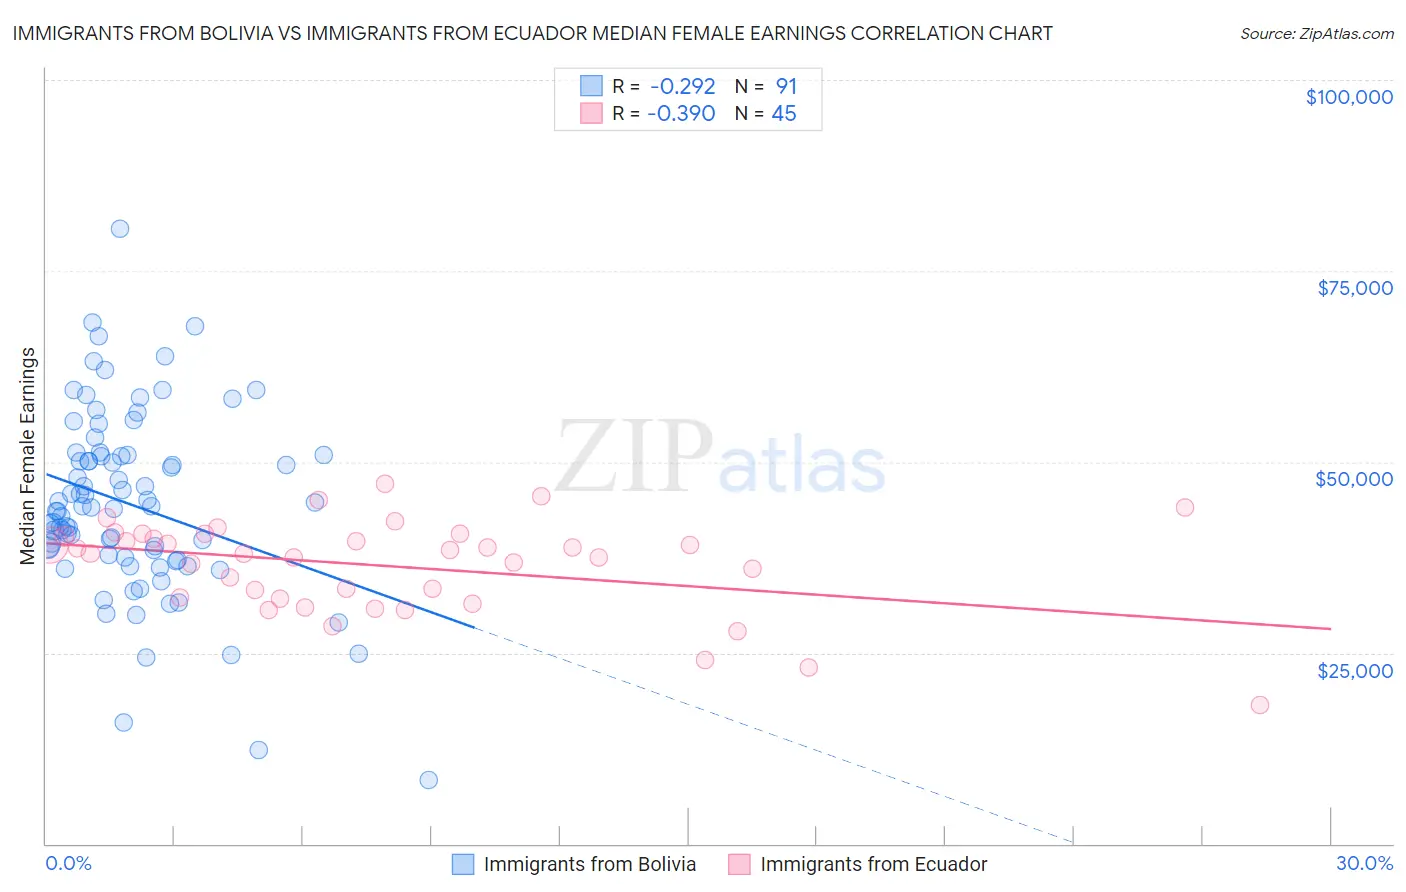 Immigrants from Bolivia vs Immigrants from Ecuador Median Female Earnings